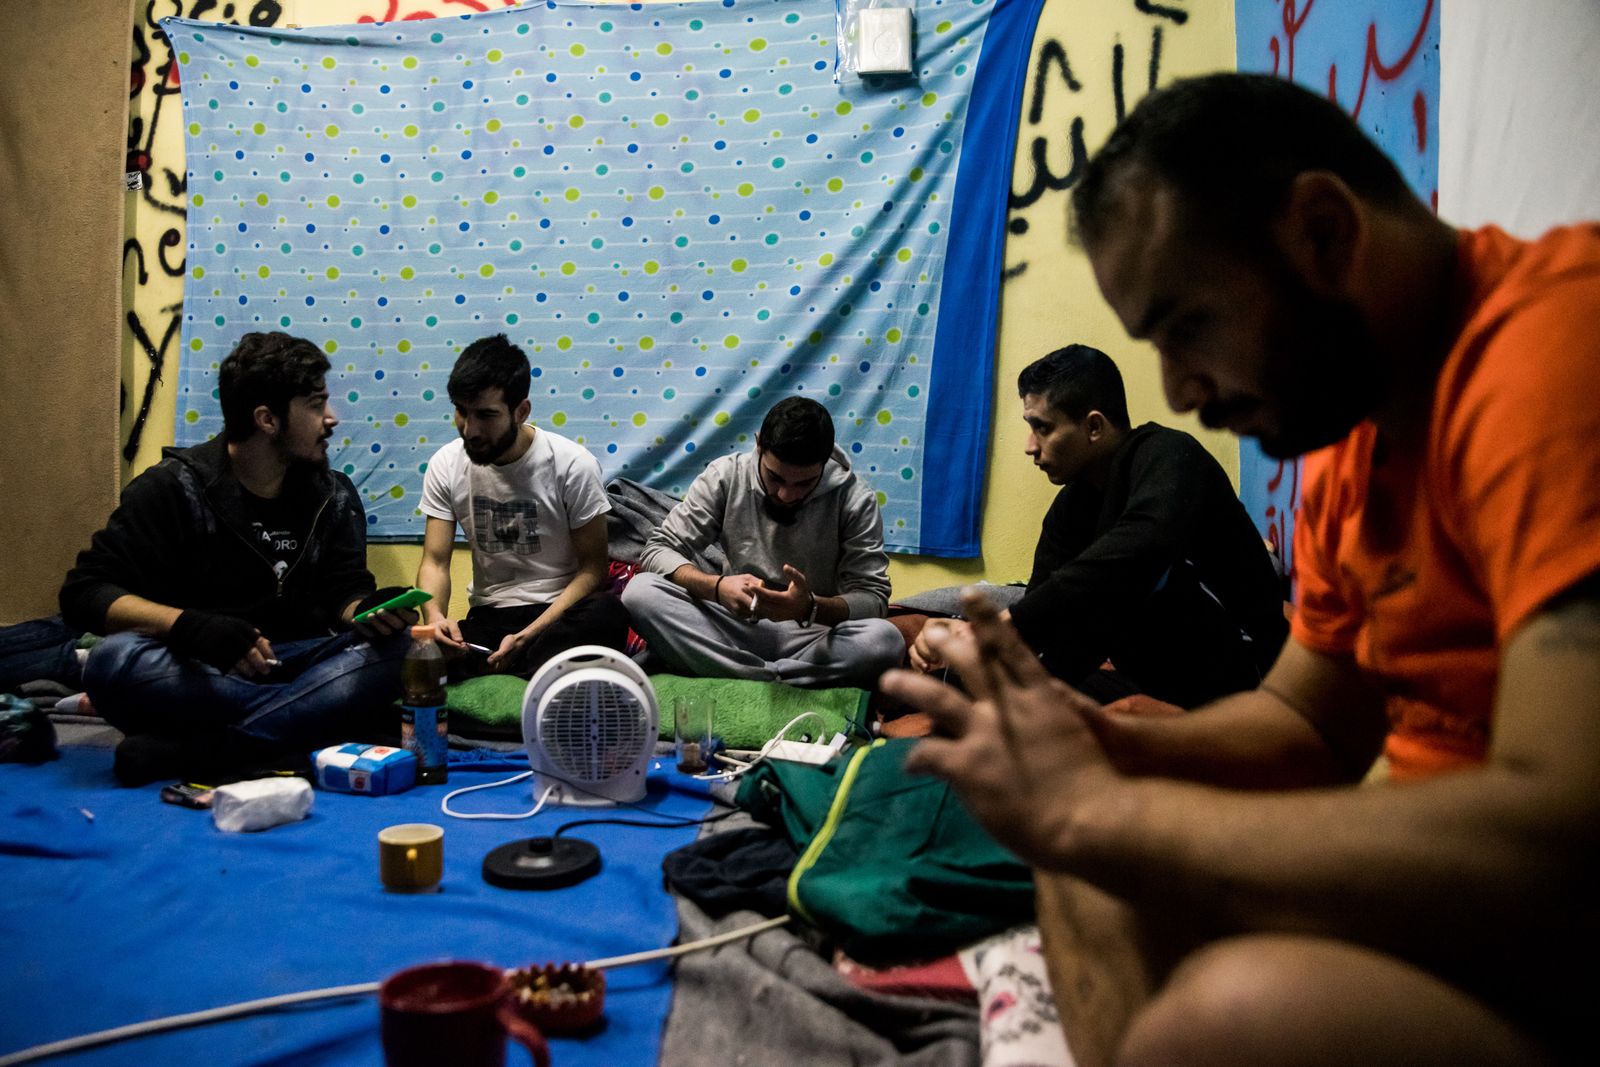 © Zoltán Balogh - Refugee men chat in a squat home named 2nd School in Athens, Greece, 05 December 2016.